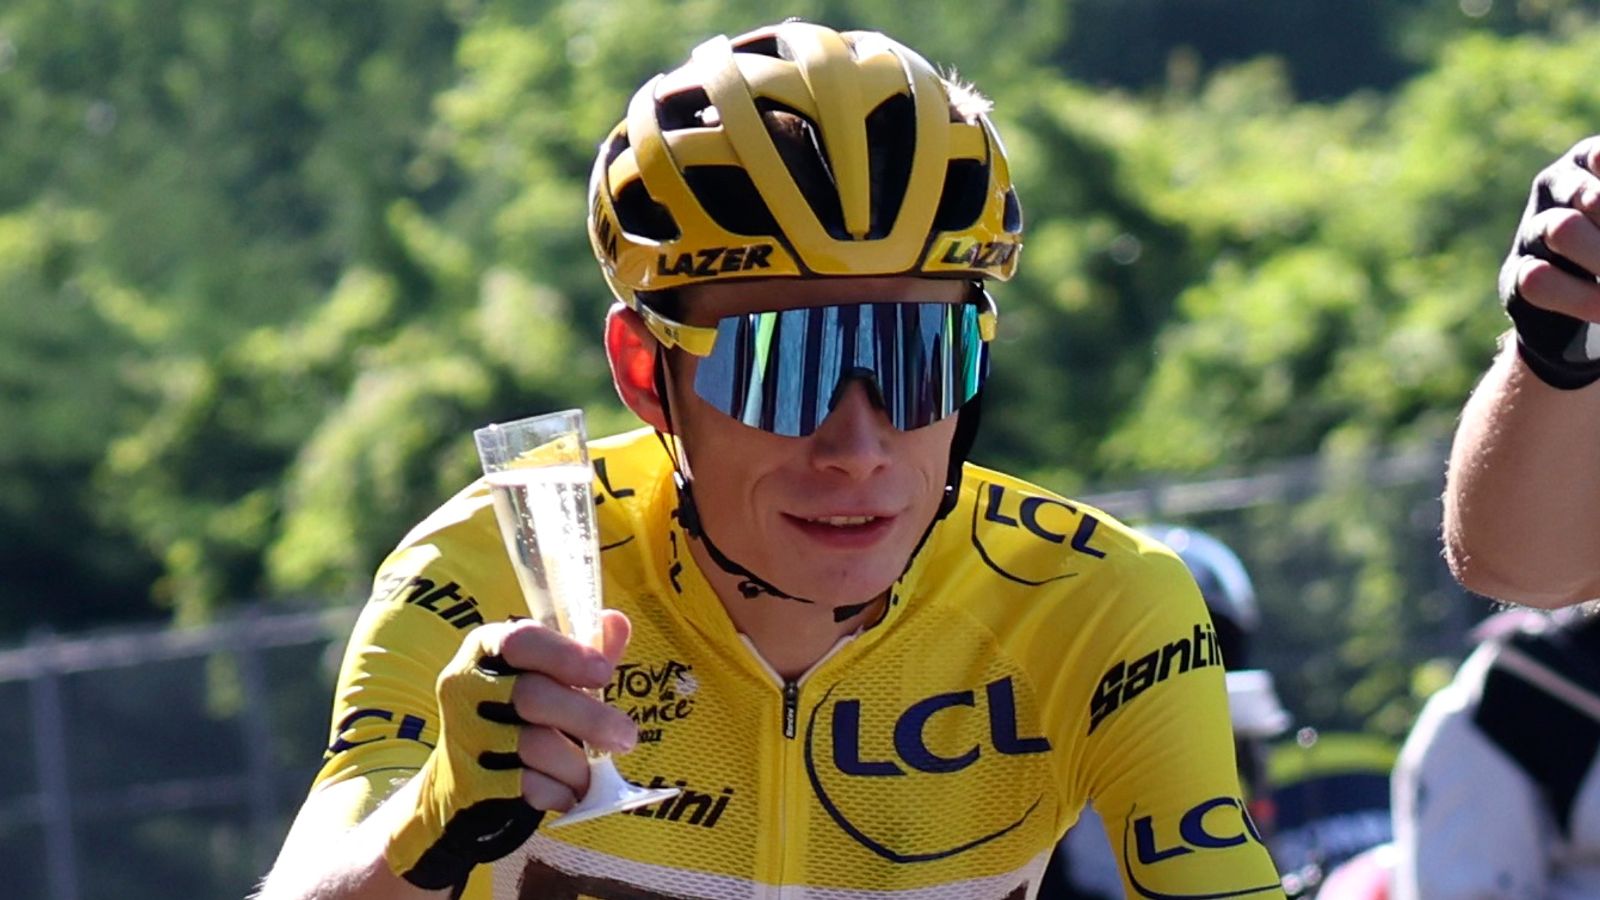 Tour de France: Jonas Vingegaard wins Tour for first time in his career as Britain’s Geraint Thomas finishes third